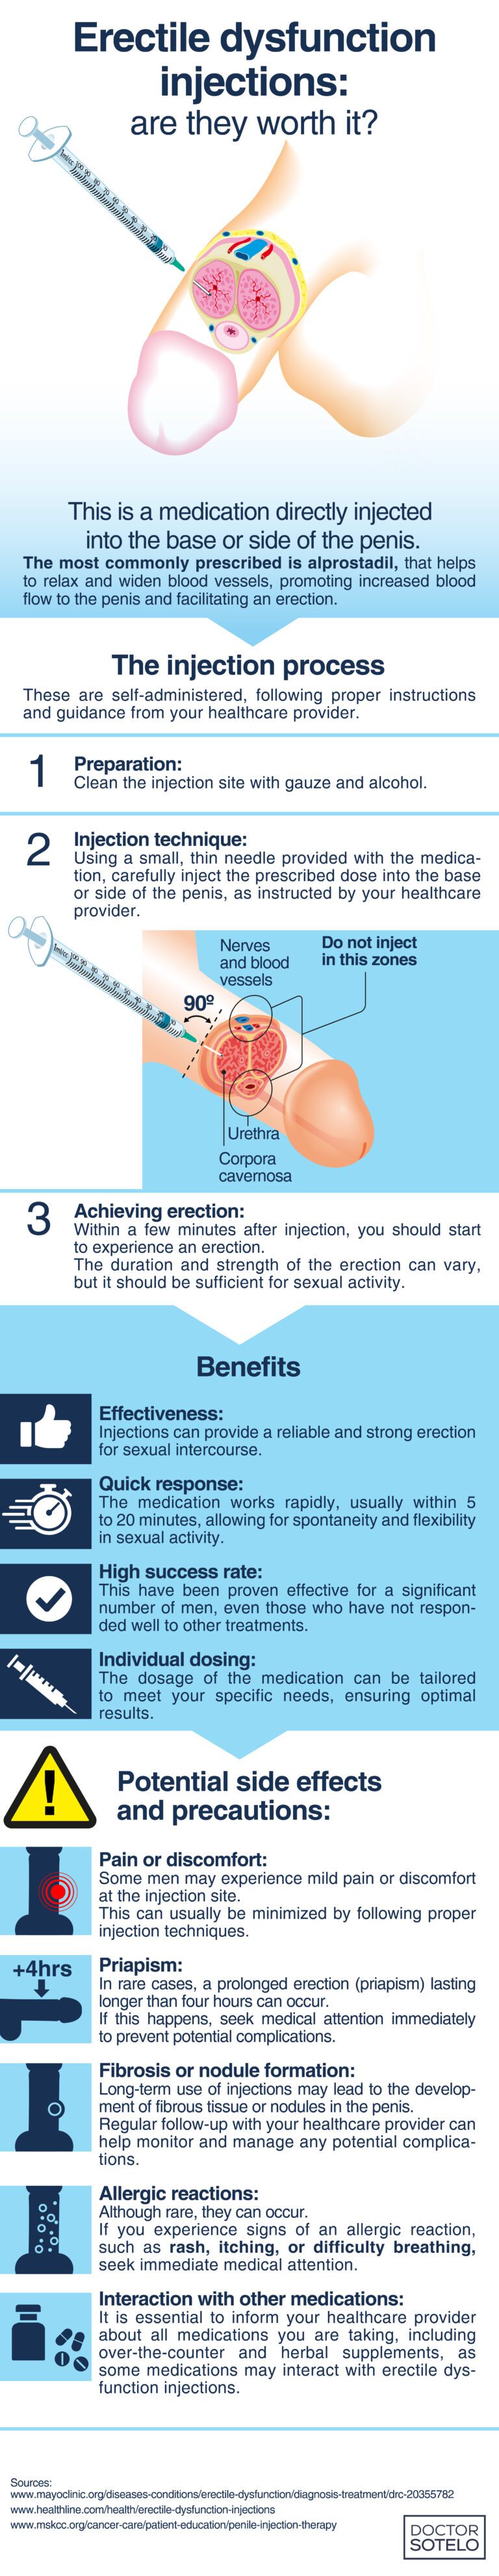 ERECTILE DYSFUNCTION INJECTIONS: ARE THEY WORTH IT?